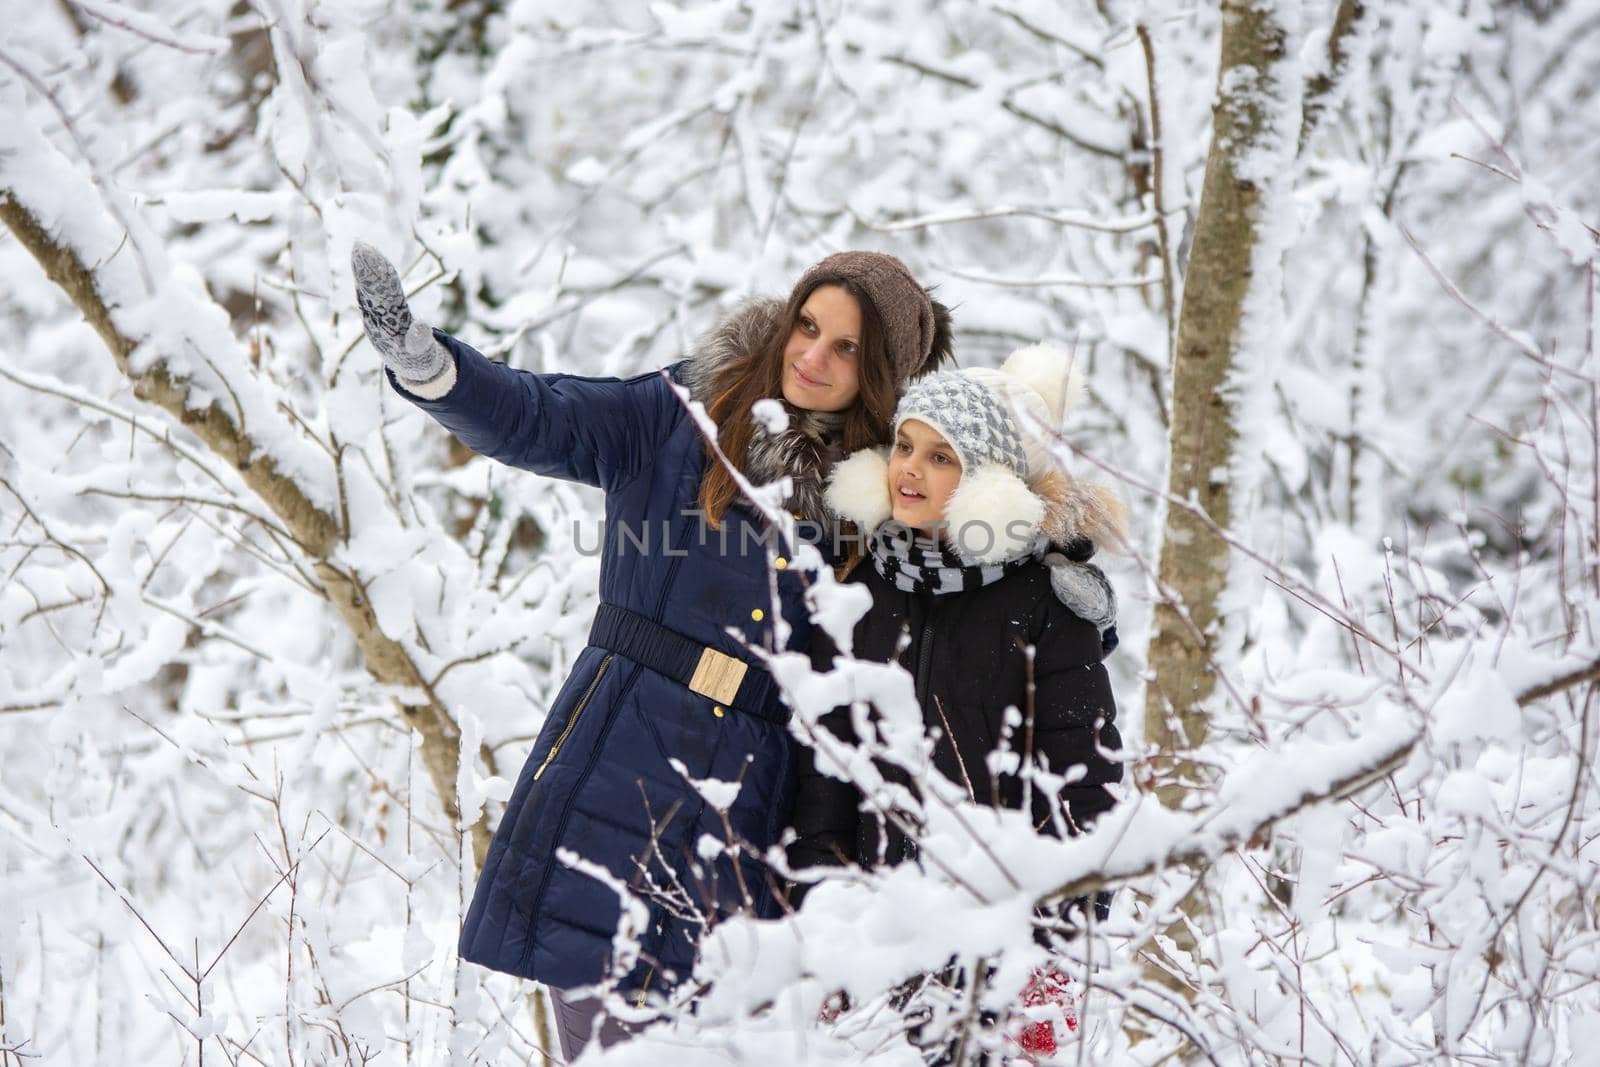 A girl and her daughter are walking through the snowy forest, the girl shows something interesting